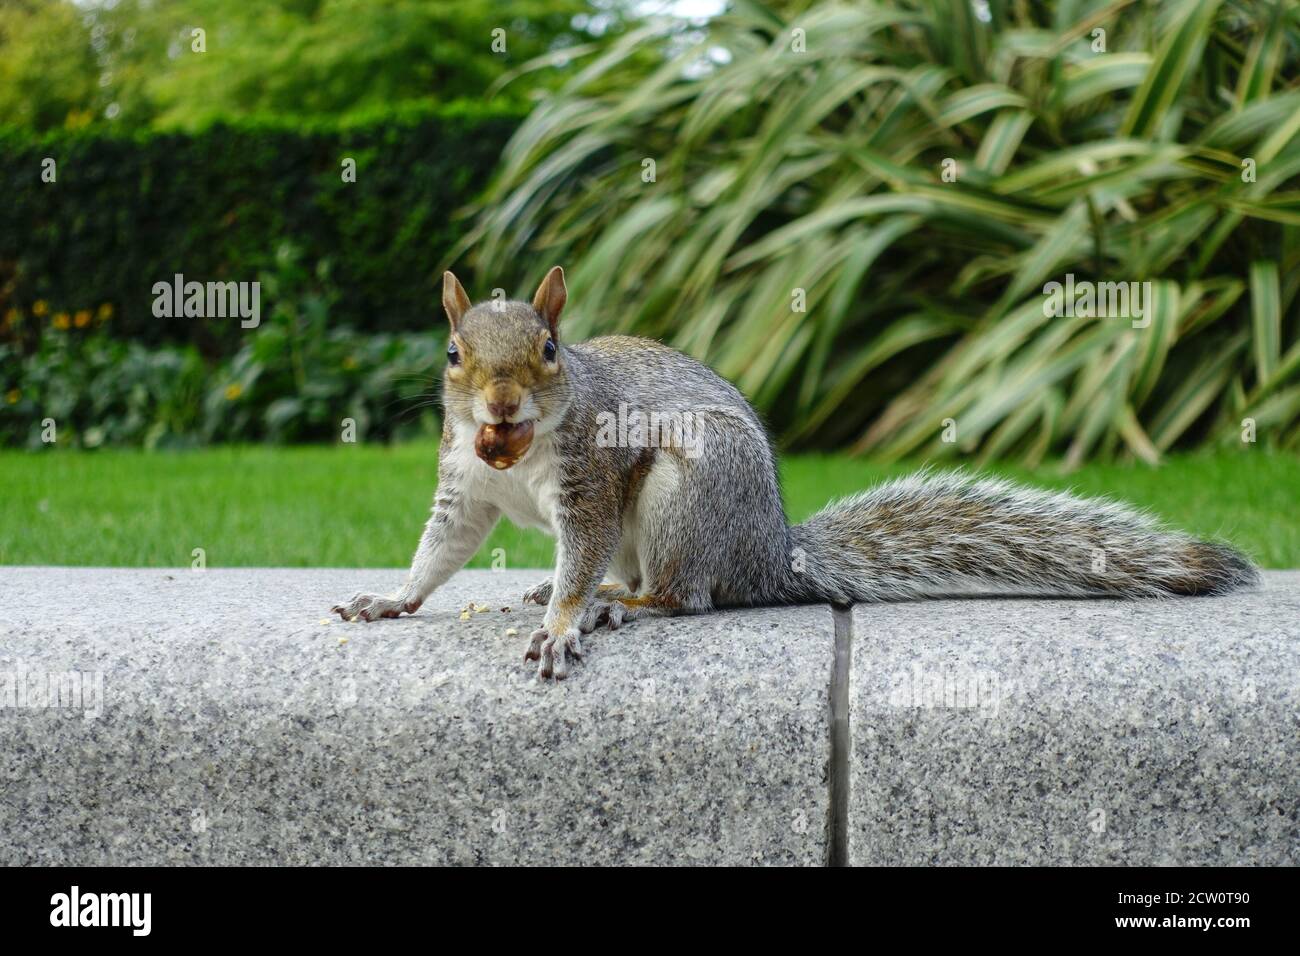 Gray squirrel holding a nut in mouth, scared squirrel eating nuts, London, UK Stock Photo